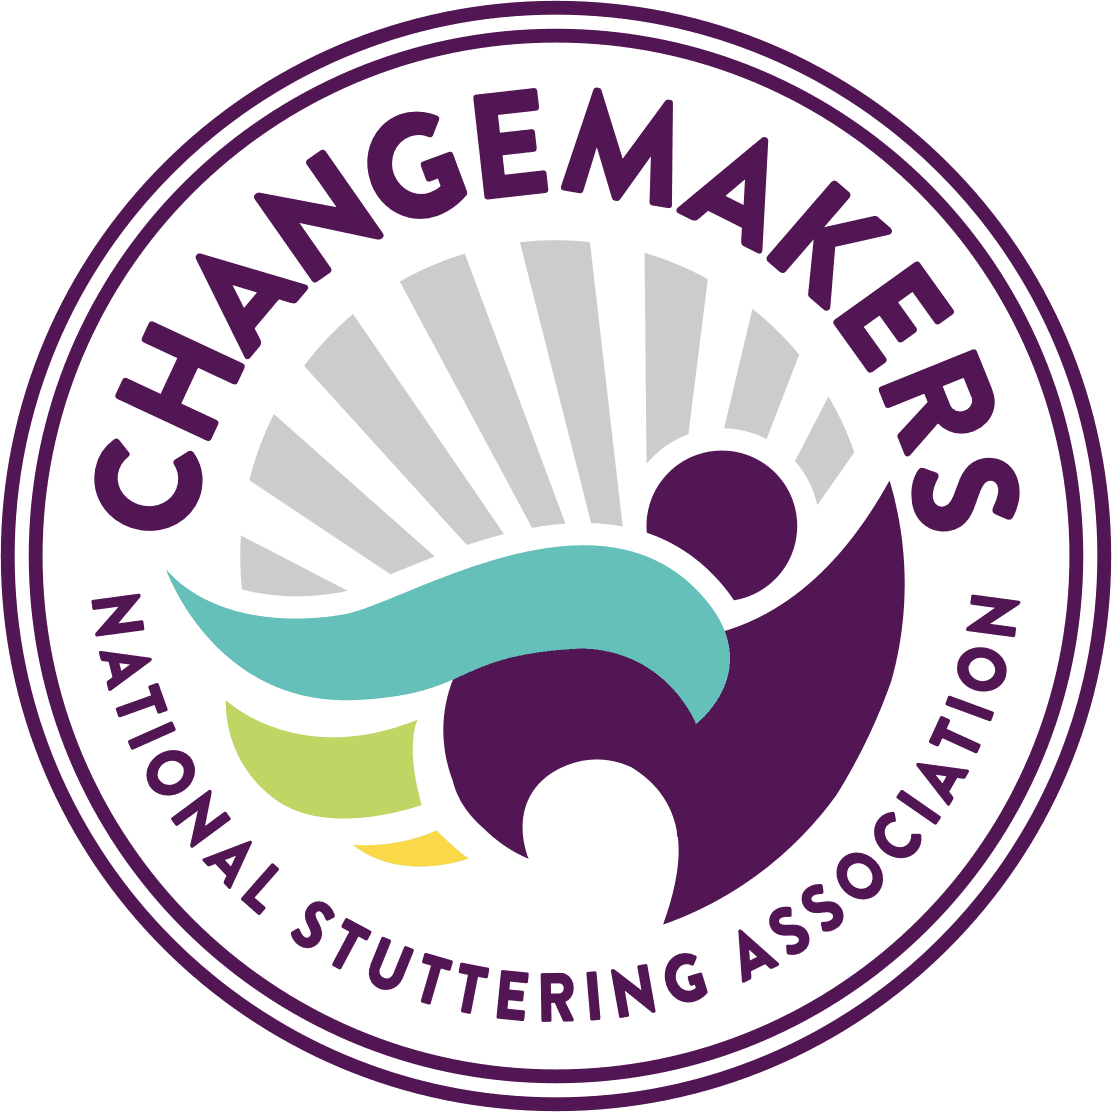 Logo of the ChangeMakers national stuttering association featuring a stylized speech bubble design in white, teal, and yellow on a dark green background.